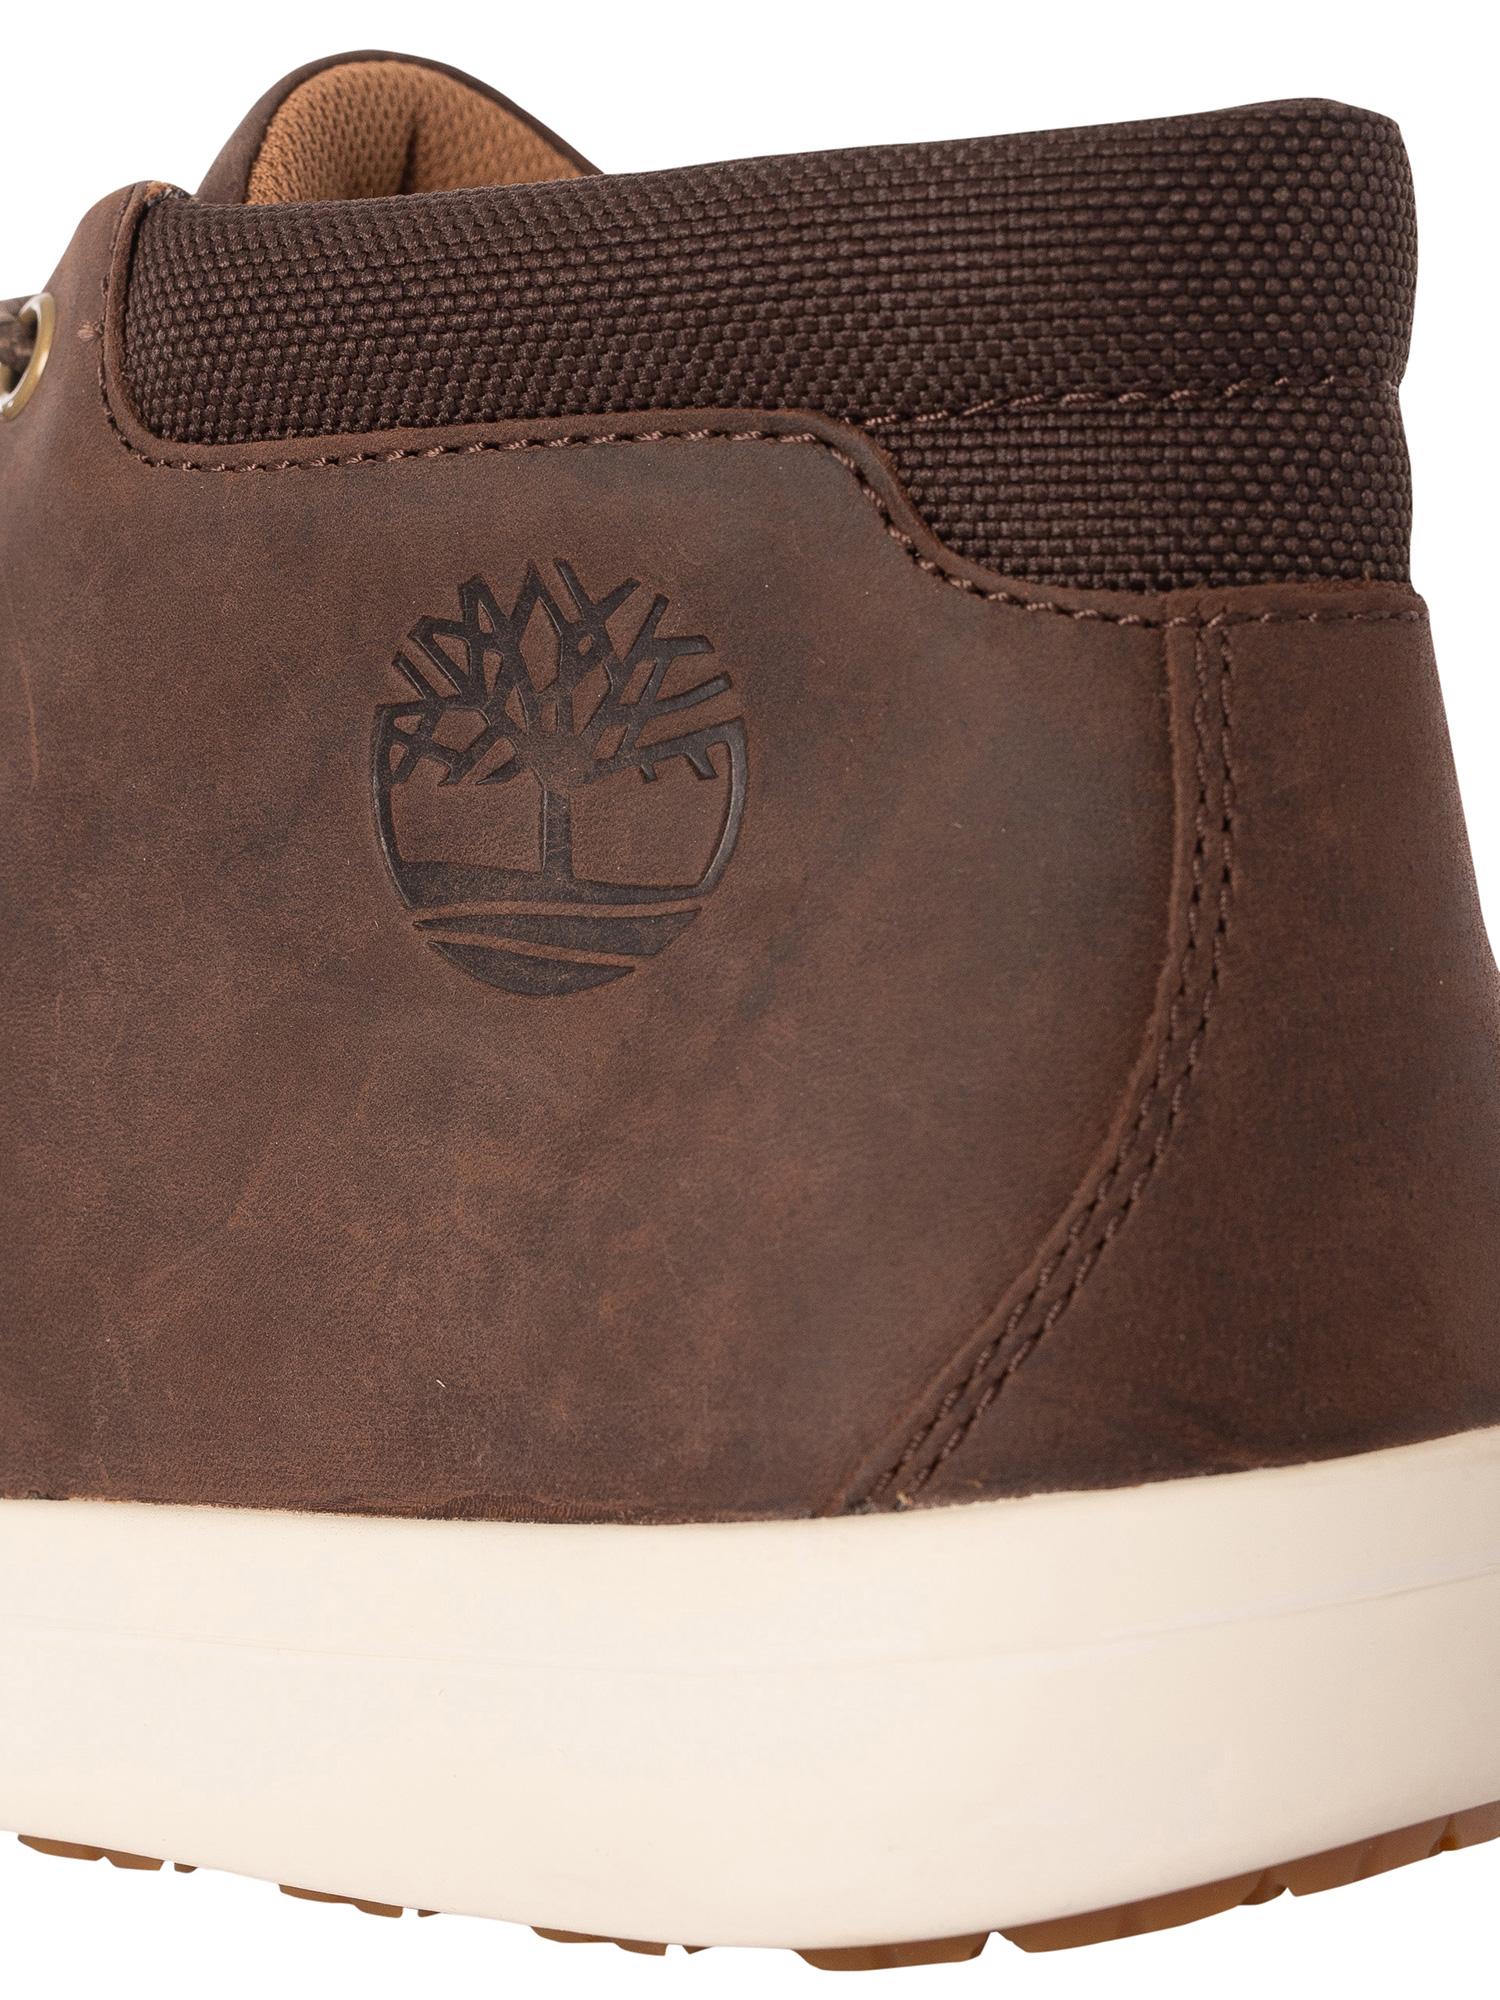 Timberland Ashwood Park Chukka Boots in Brown for Men | Lyst Australia